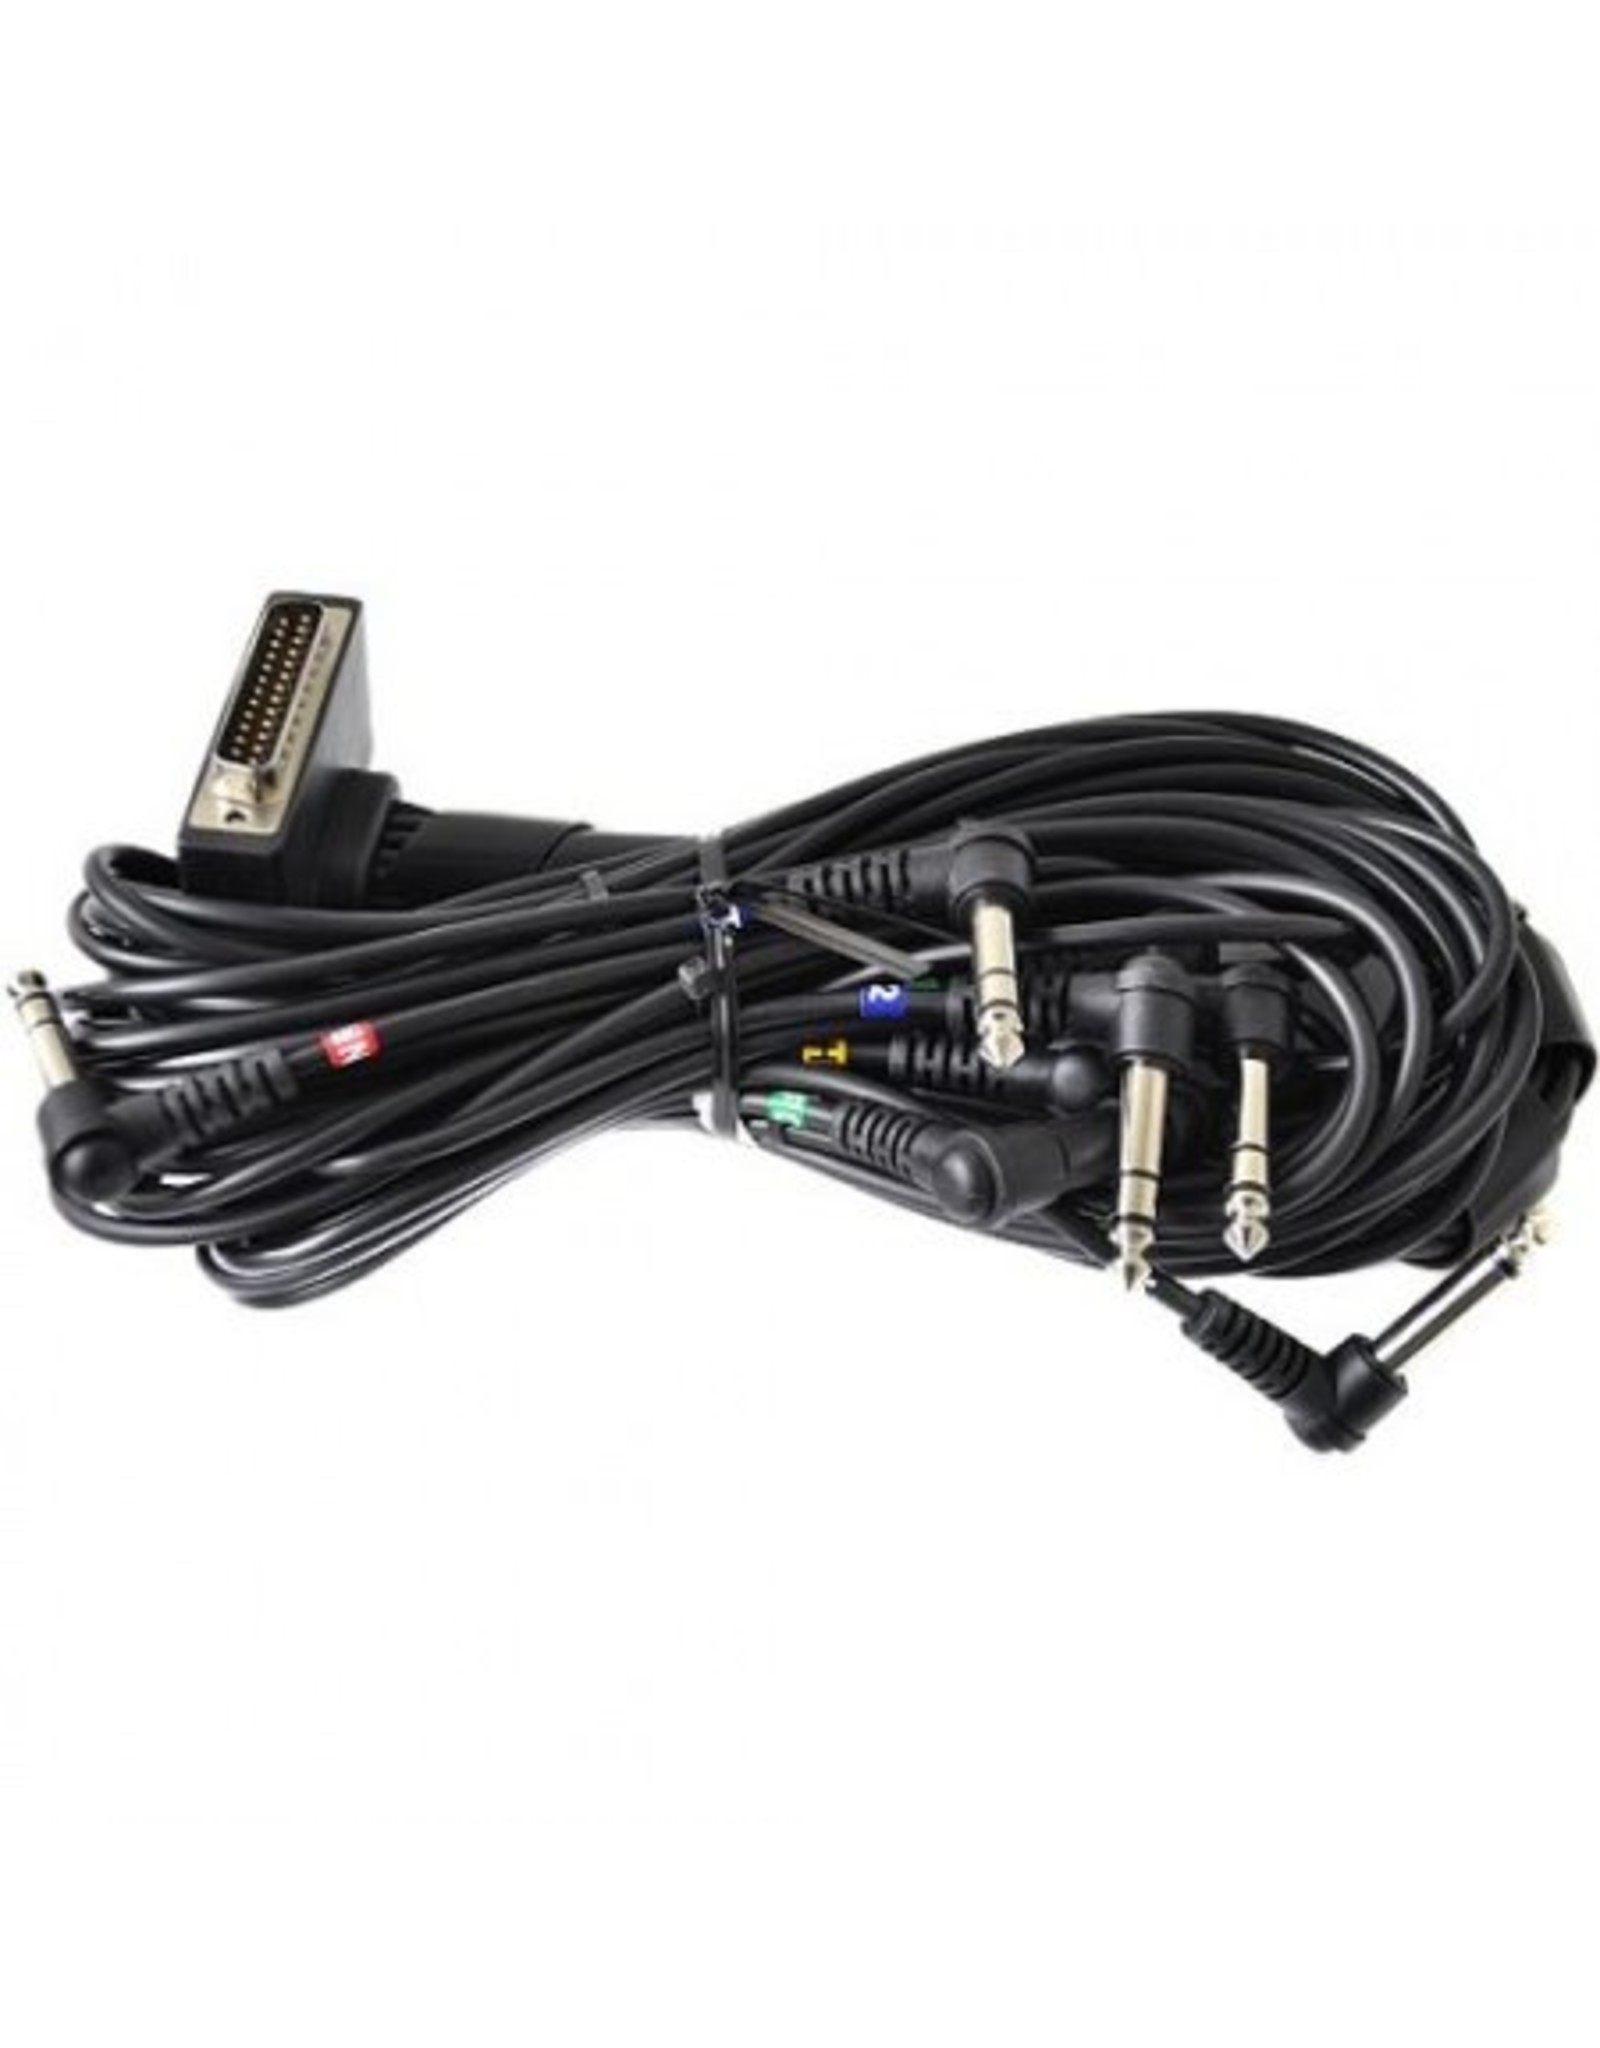 Roland C5400133R0 cable harness for TD9, TD11, TD15, TD17 & TD25 module EAN: 0144915501402